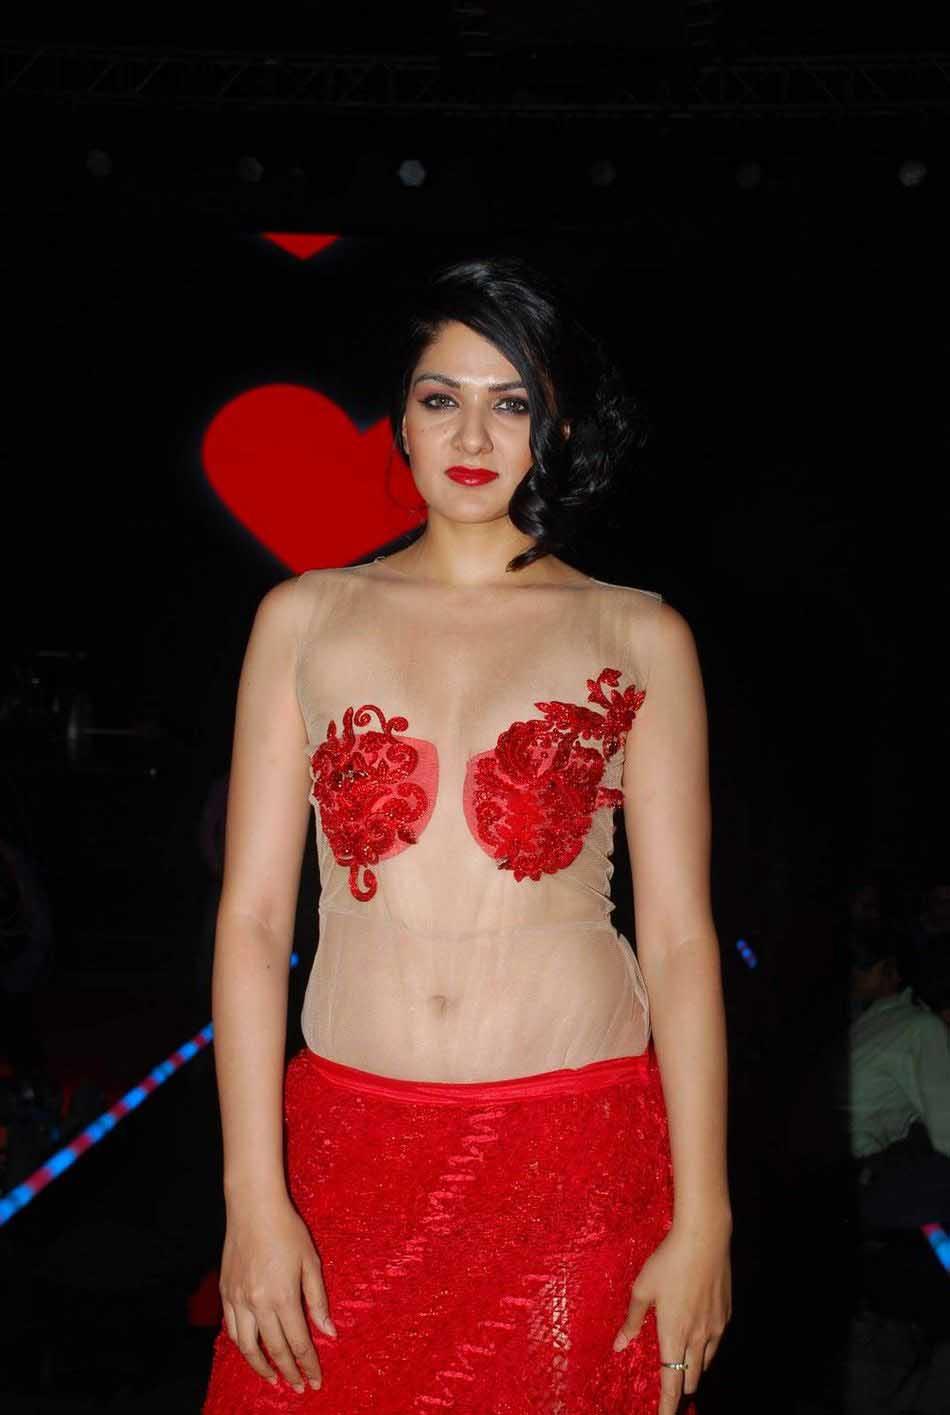 Sakshi Chaudhary Sexy Navel And Cleavage Show In Transparent Dress 2 Aaaatce